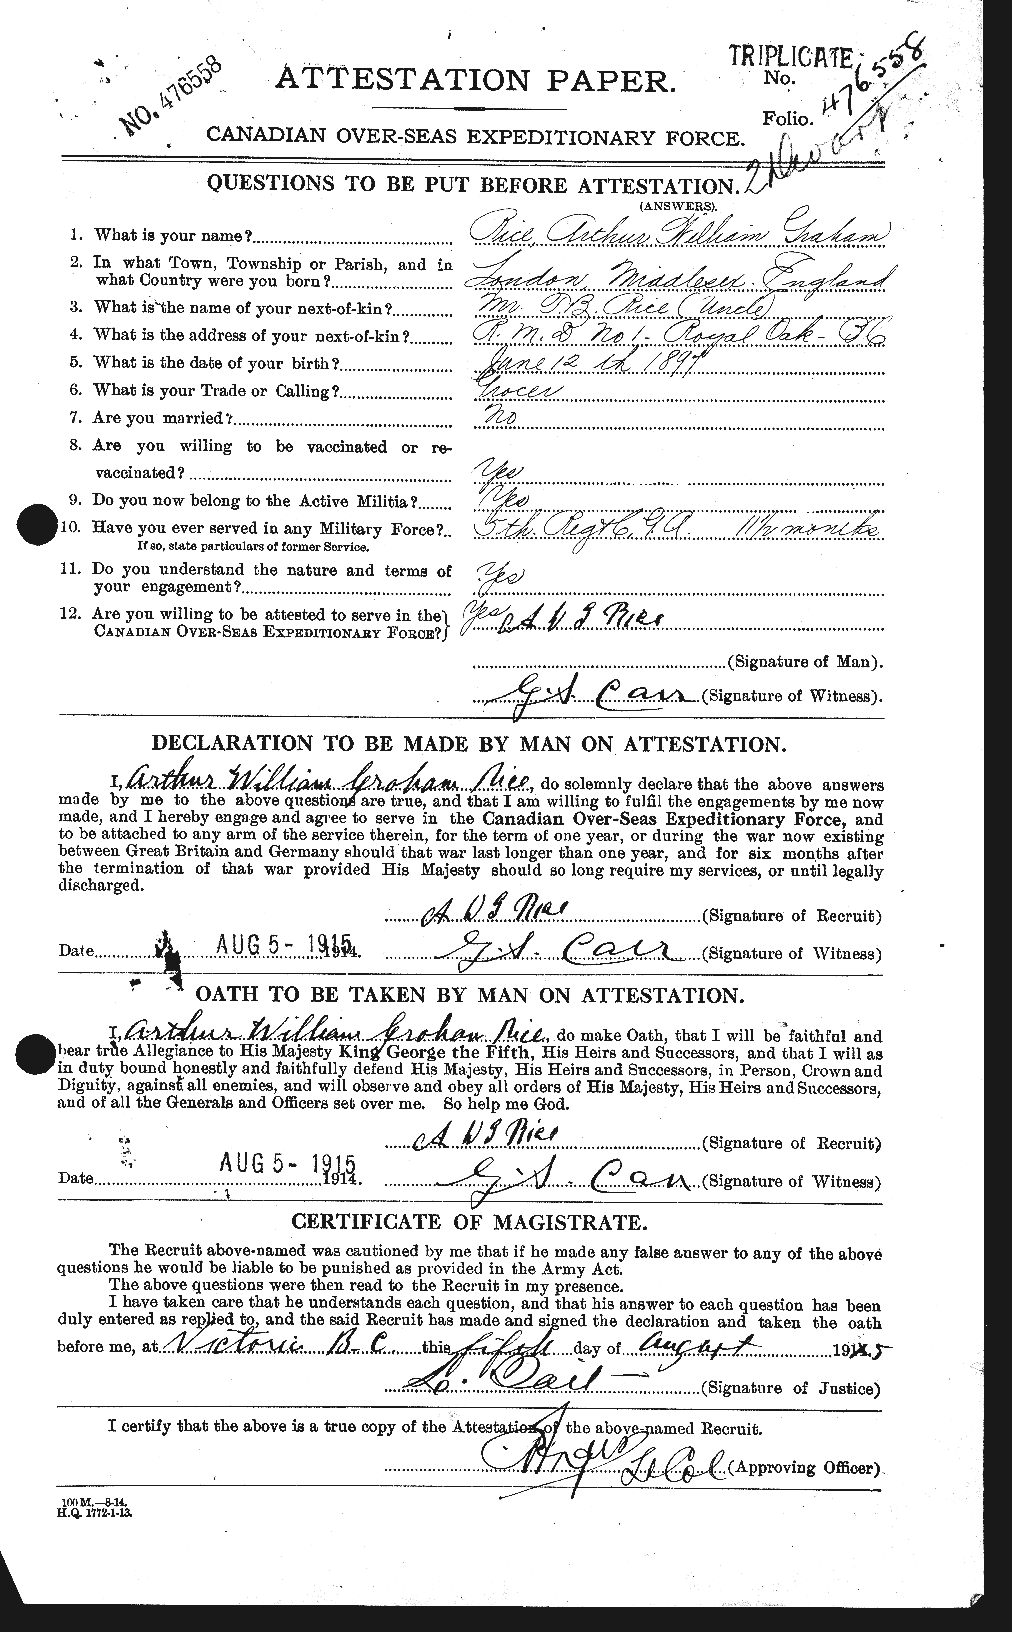 Personnel Records of the First World War - CEF 602614a